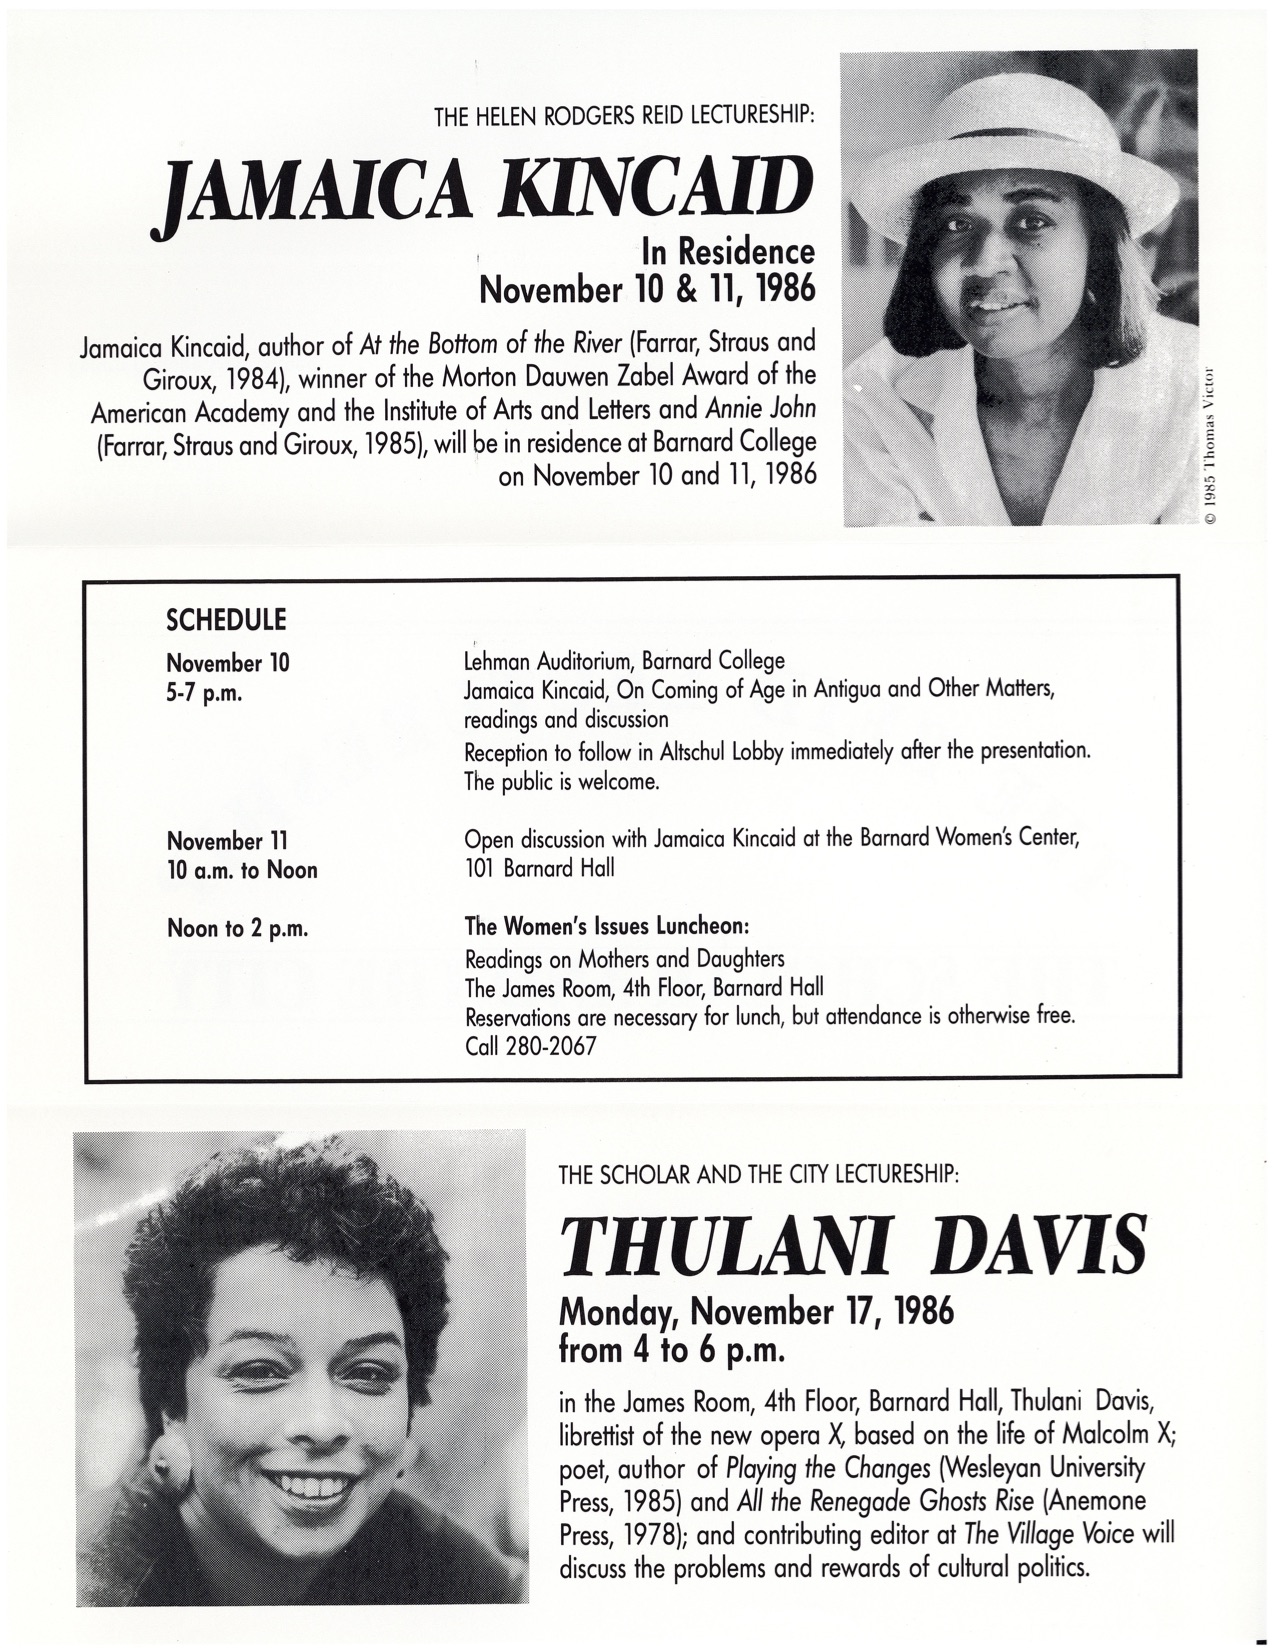 Flyer for the 1986 Reid Lecture, featuring Jamaica Kincaid and Thulani Davis